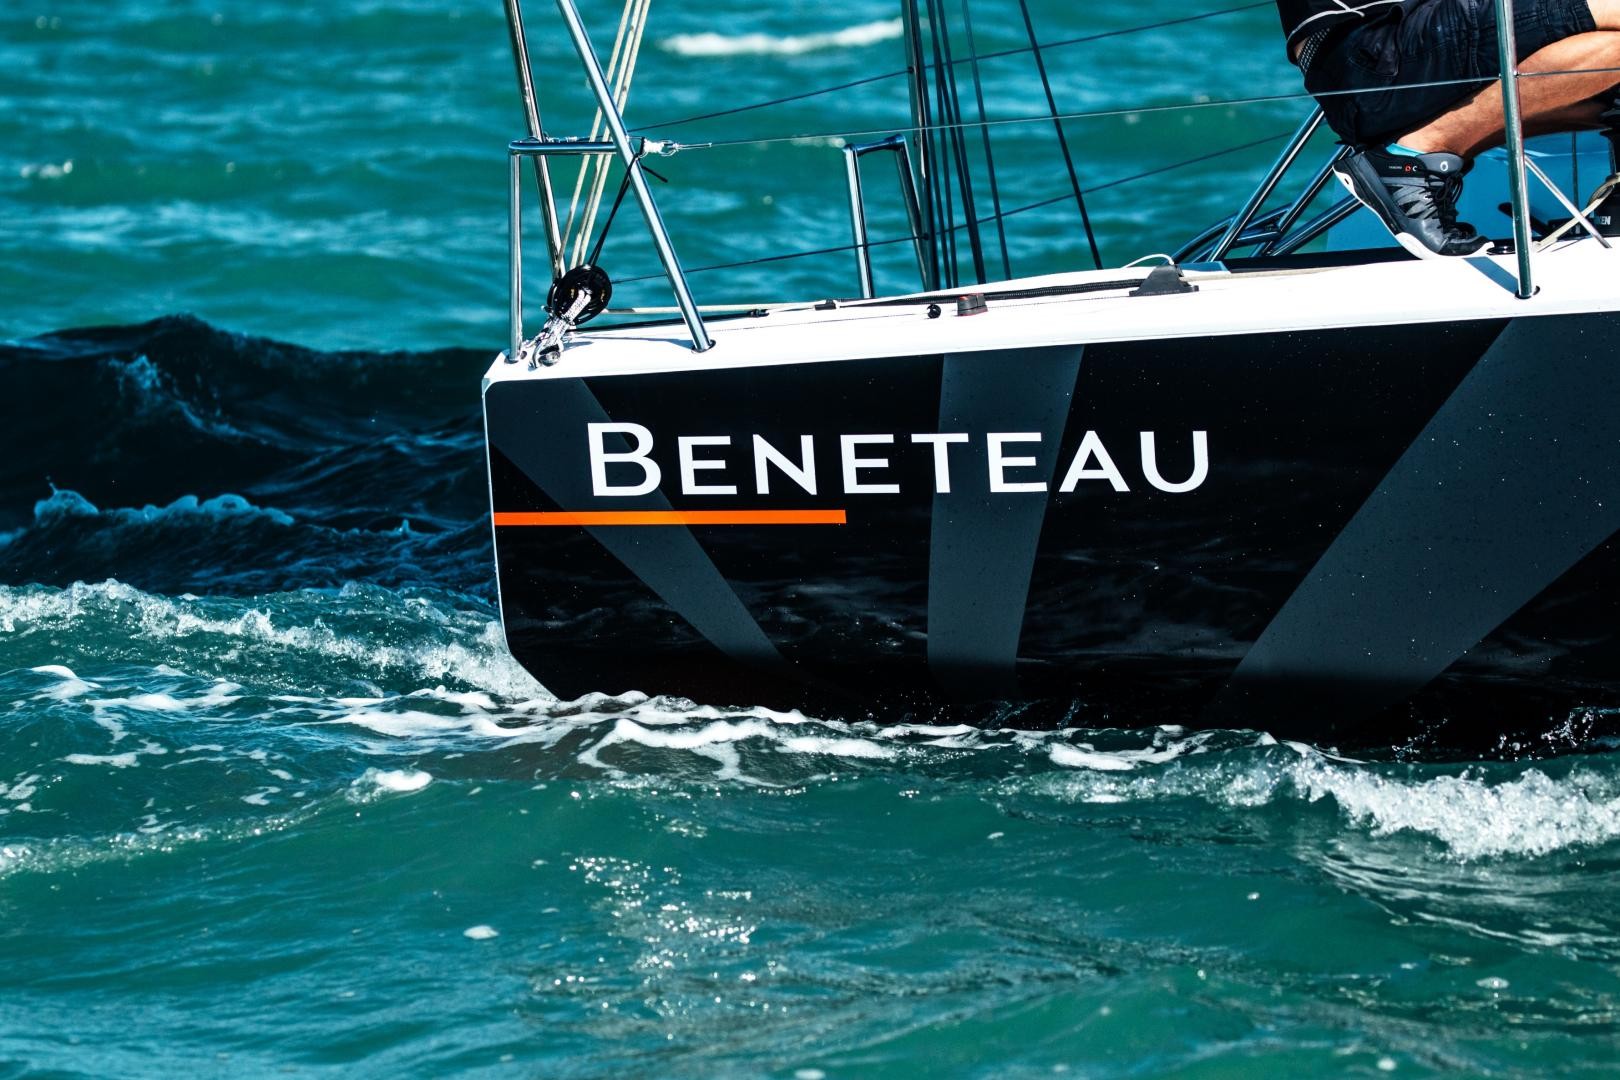 Beneteau Groupe has started production up again at three sites since April 27